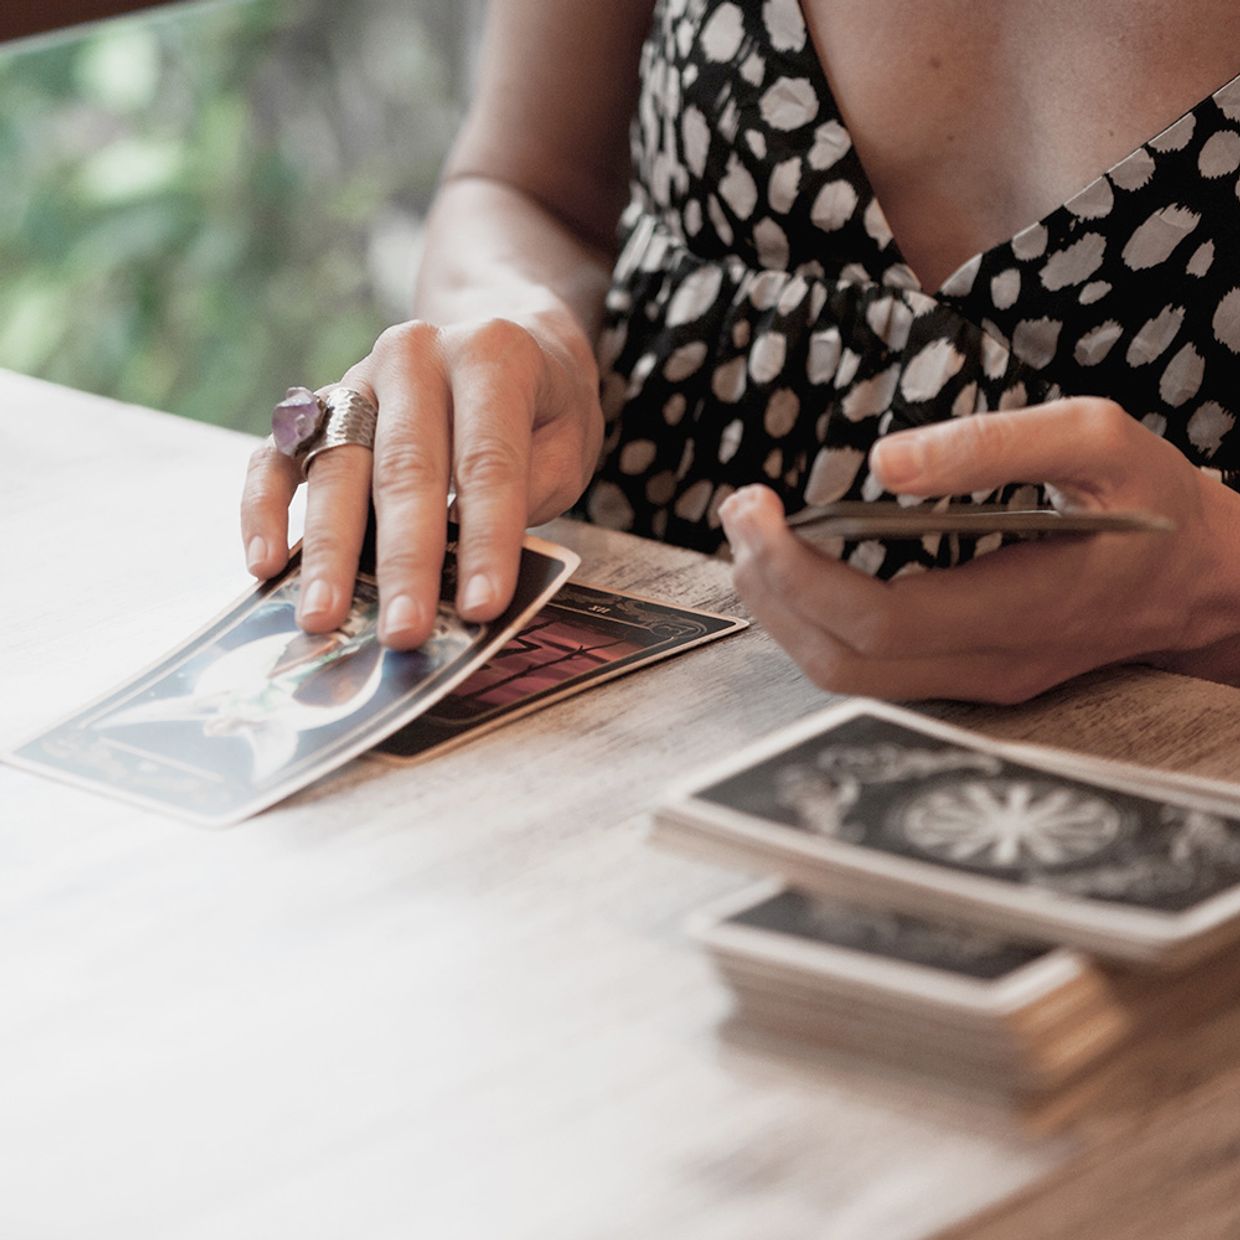 Should You Read Your Own Tarot Cards?